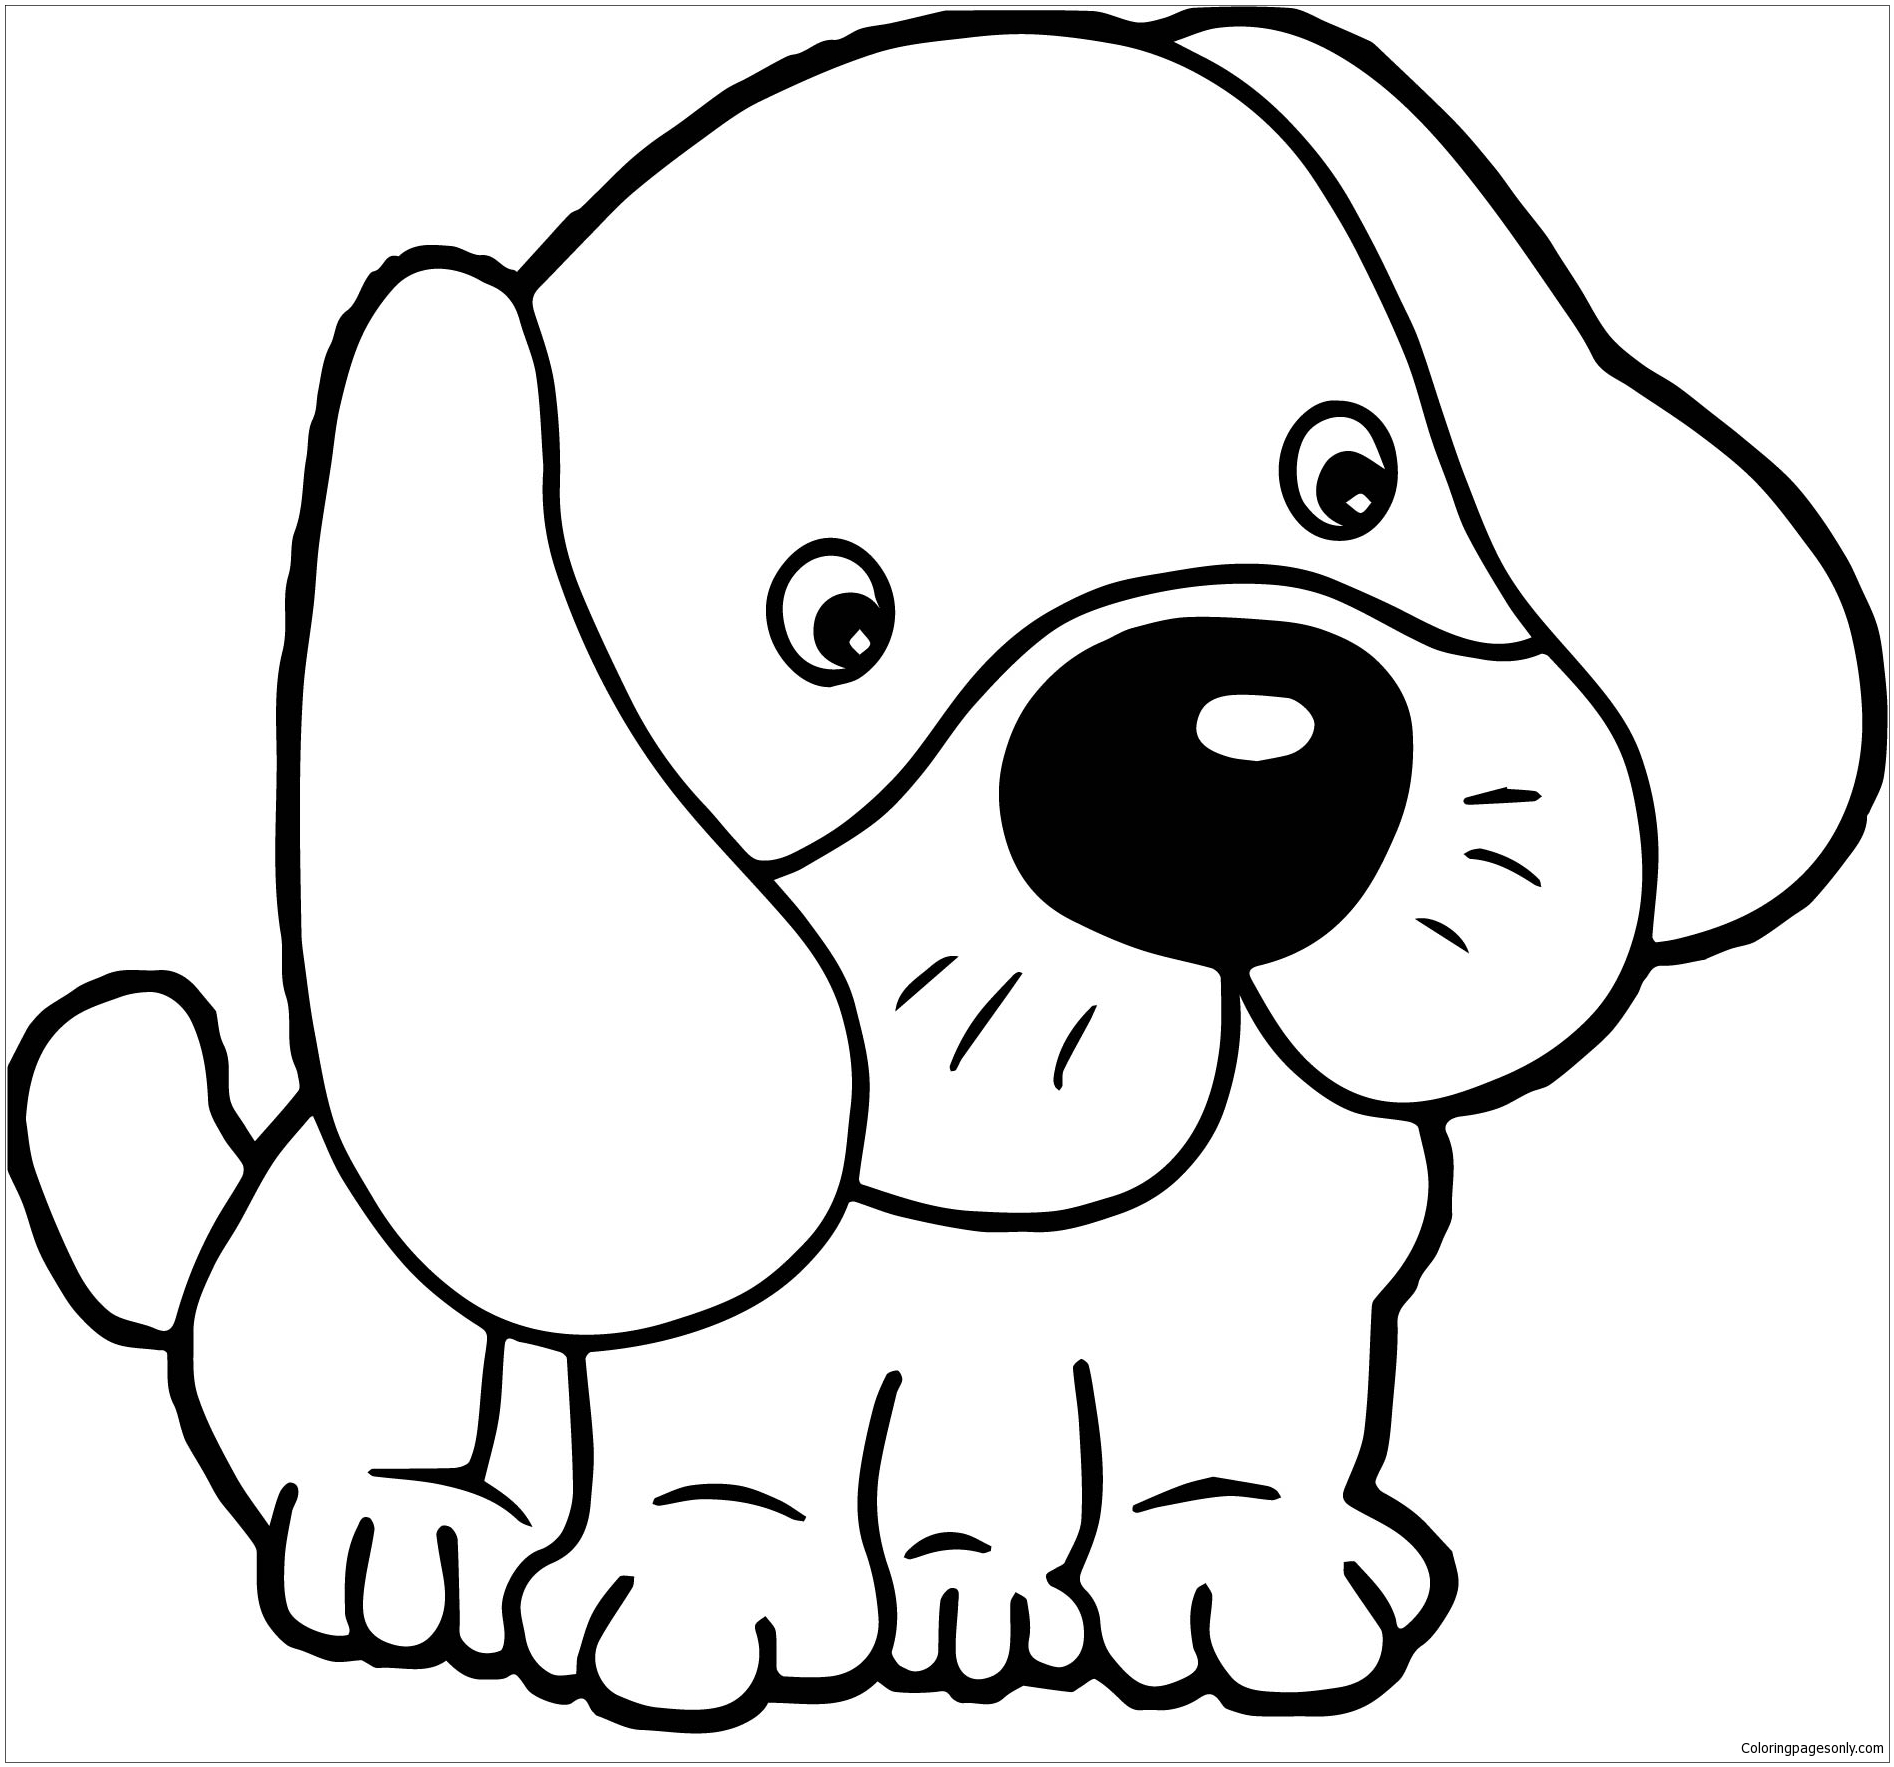 Puppy Dogs Cute Coloring Page - Free Coloring Pages Online